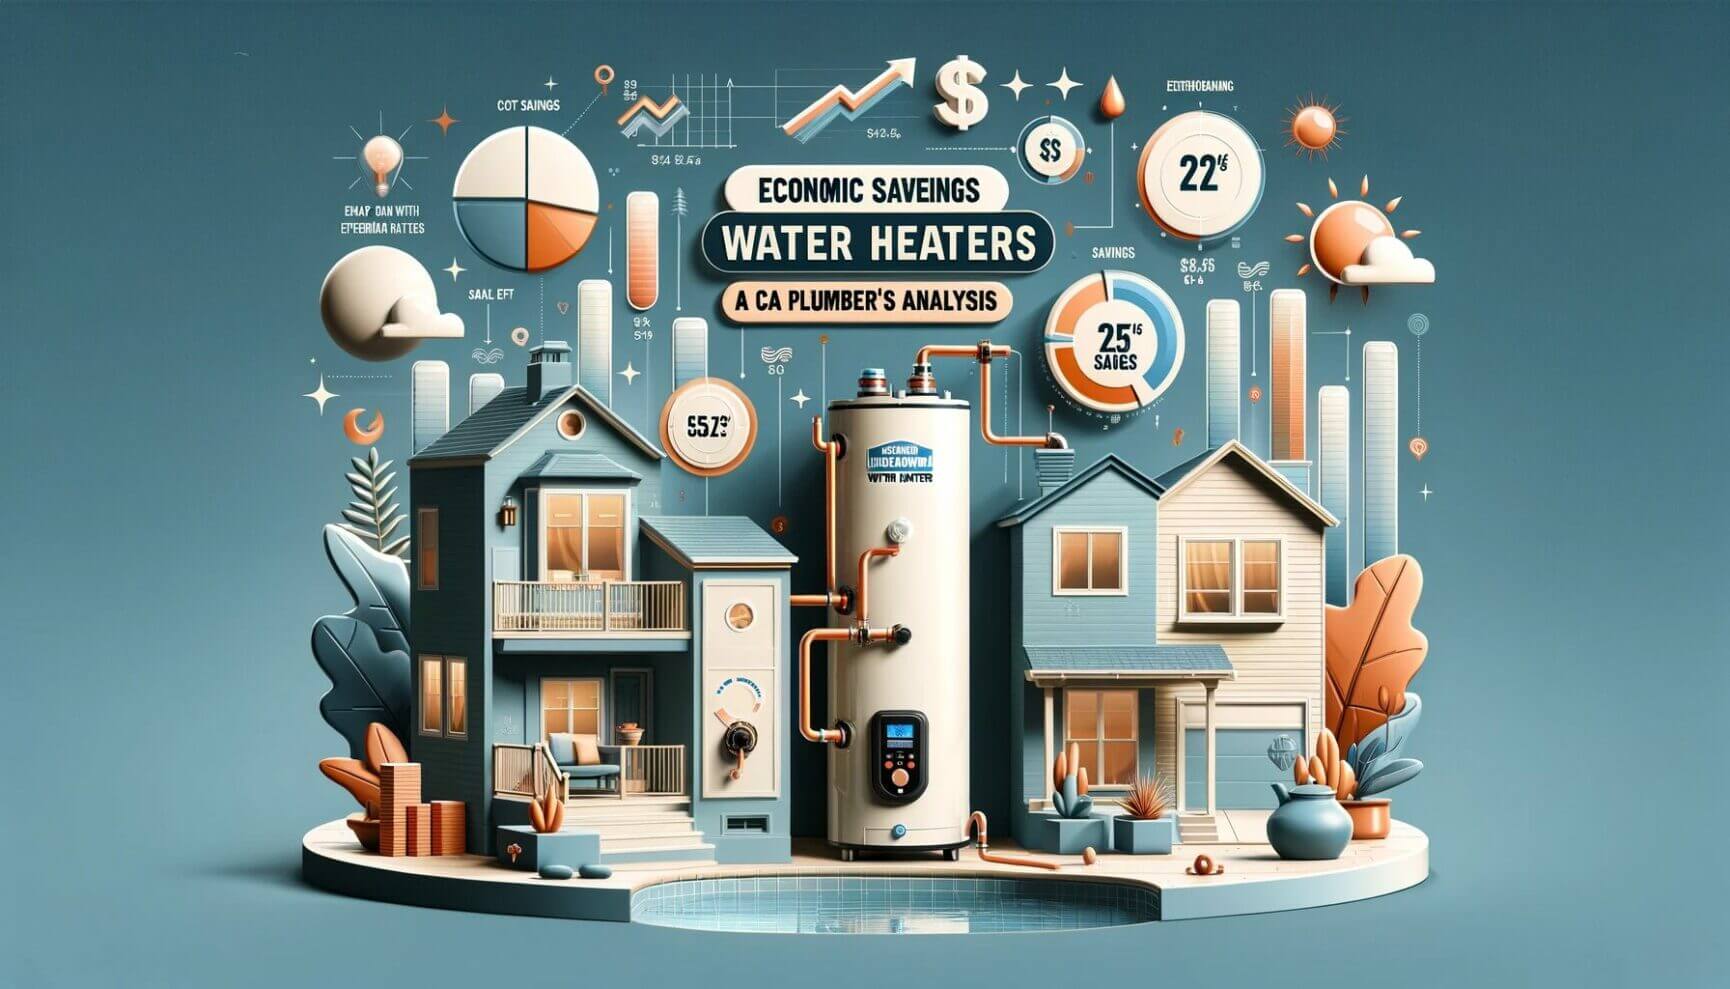 An illustration of a house with a water heater.